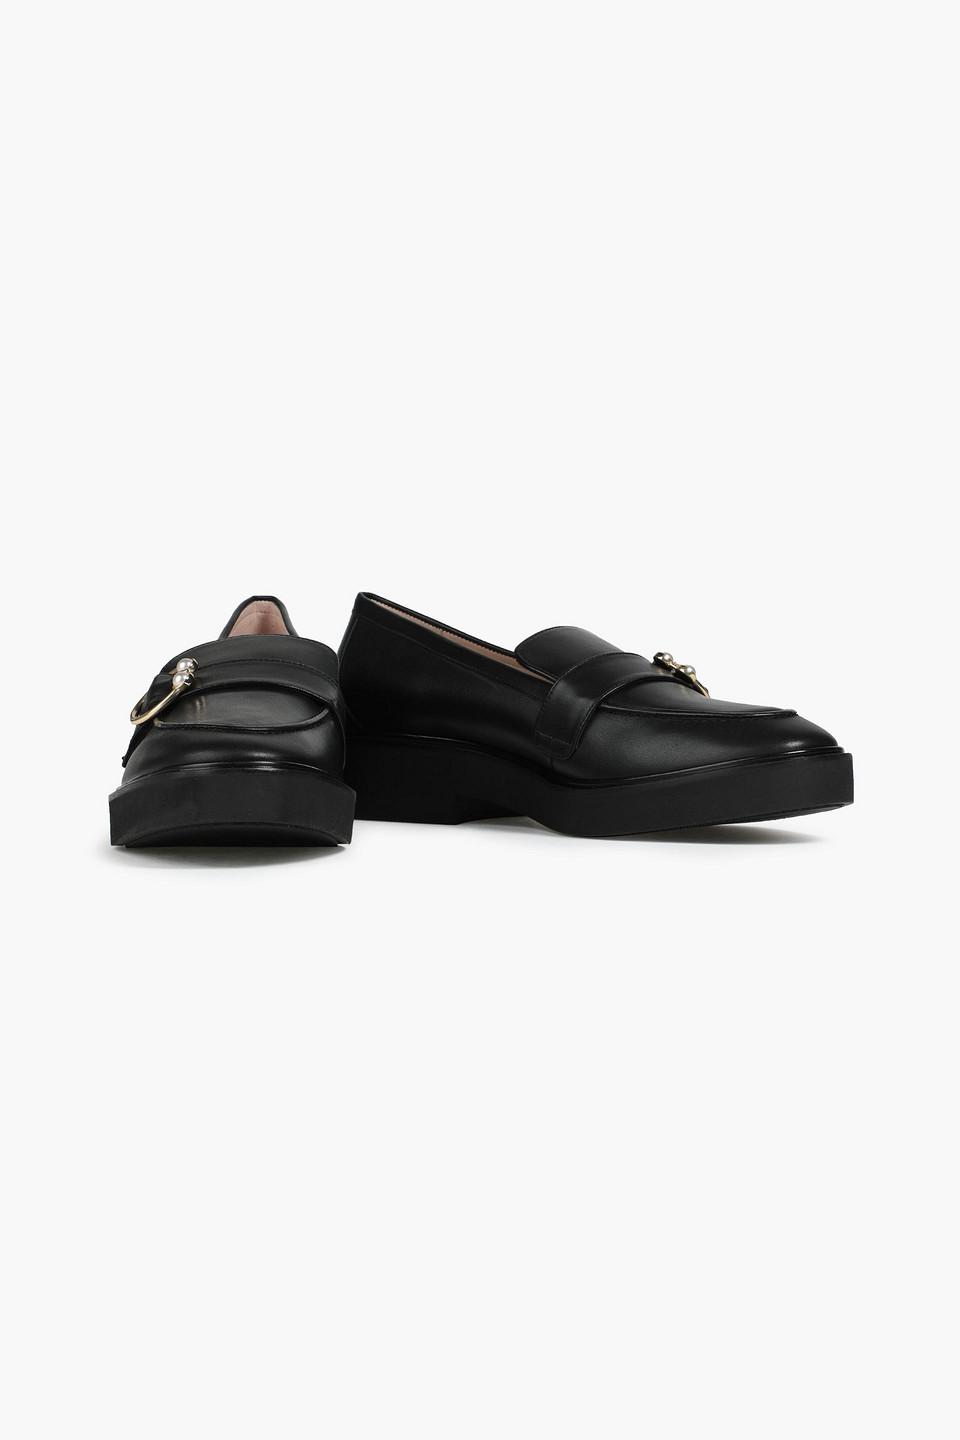 Stuart Weitzman Embellished Leather Loafers in Black | Lyst